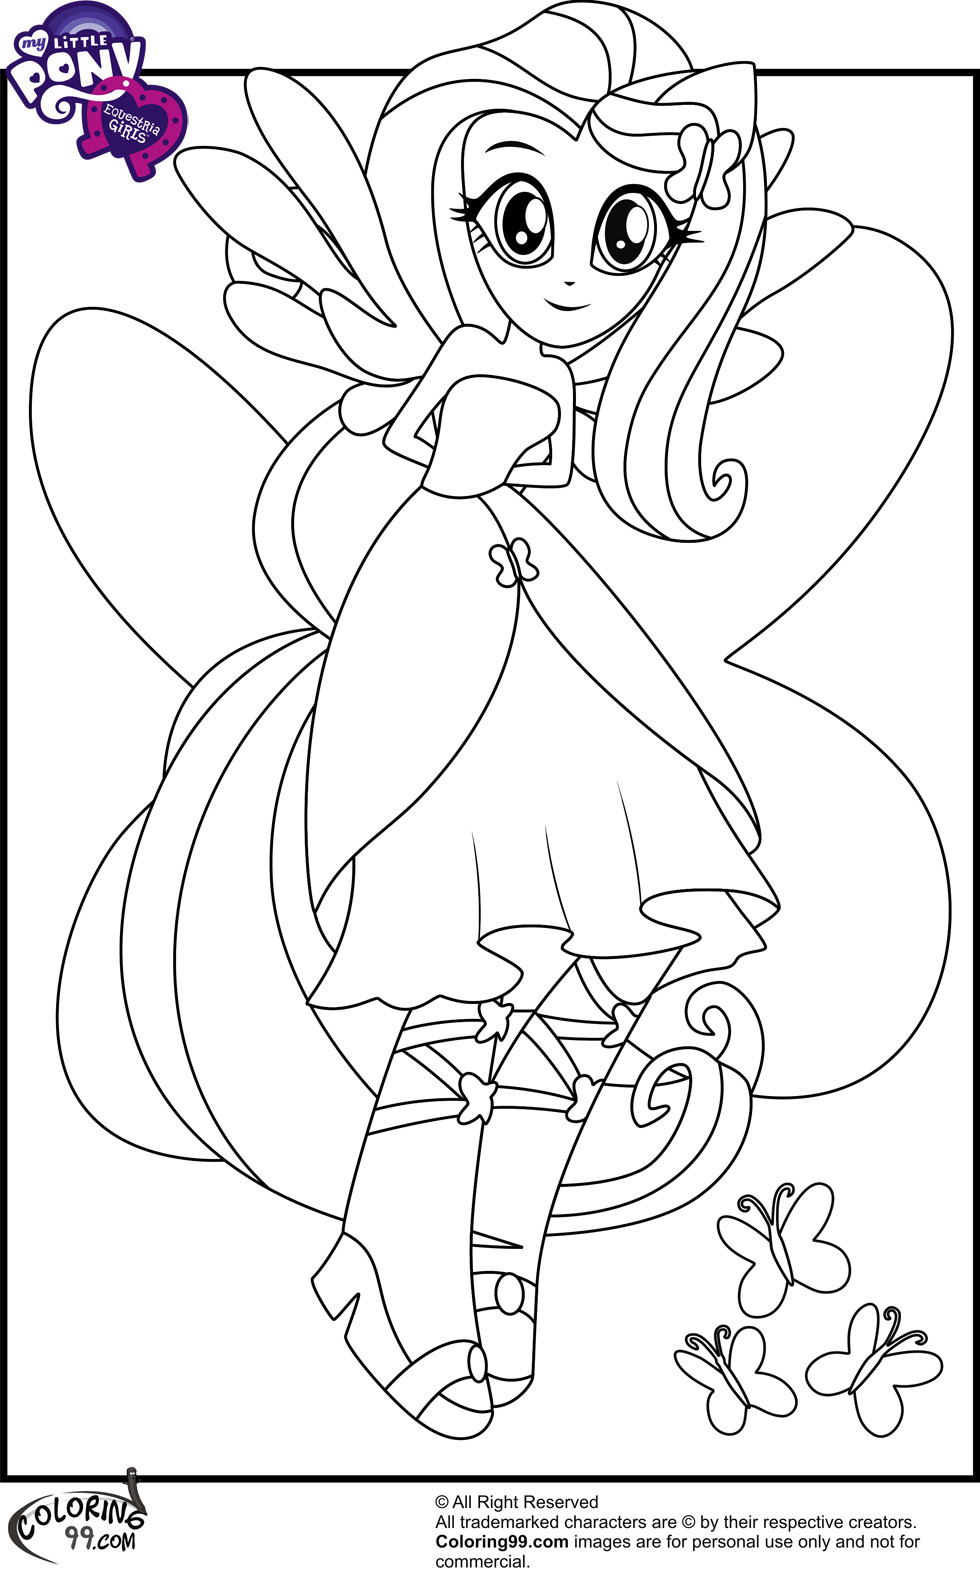 Fluttershy Equestria Girl Coloring Pages
 My Little Pony Equestria Girls Coloring Pages